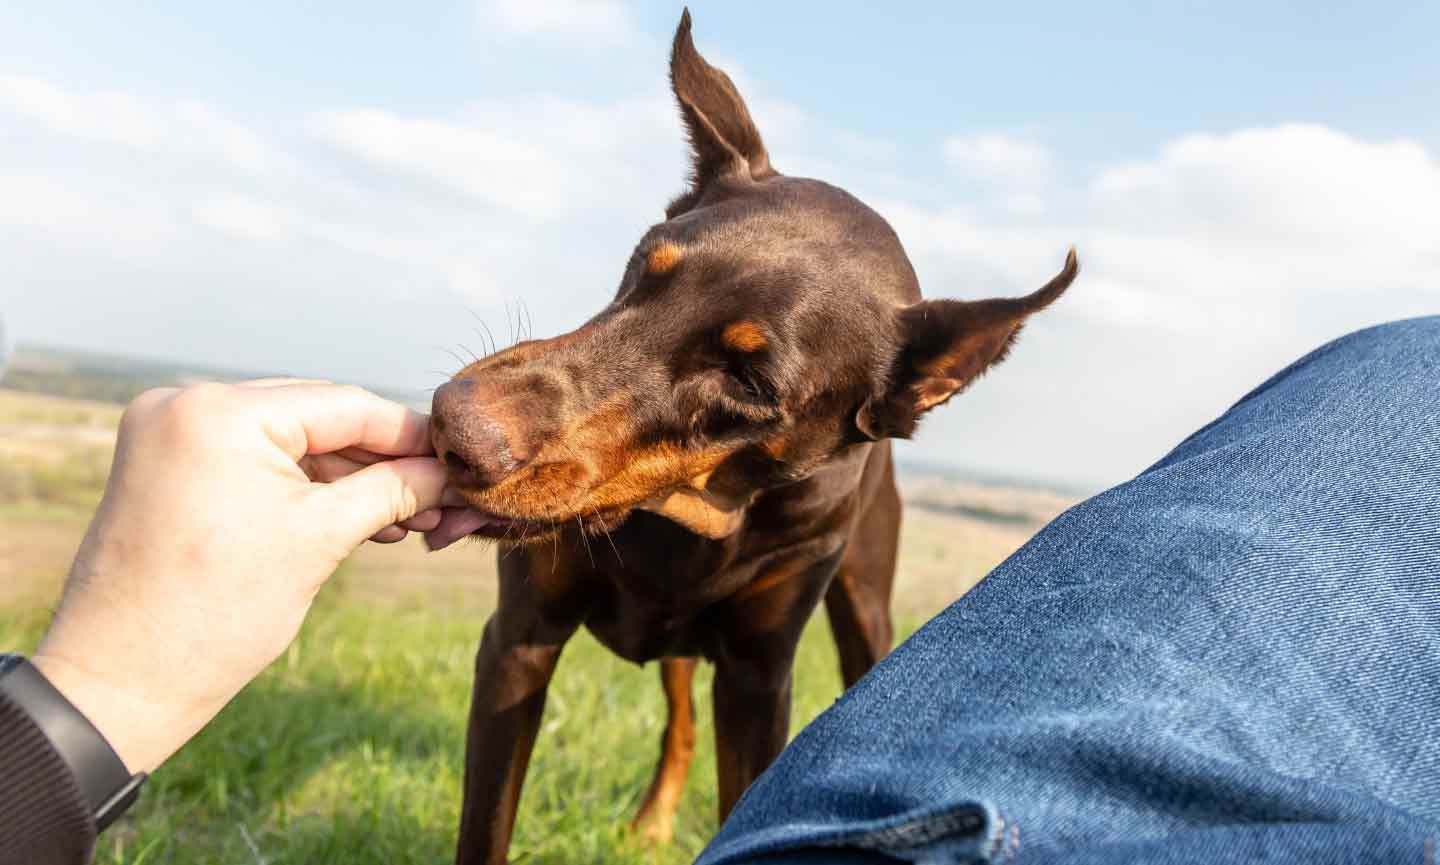 A Doberman taking a treat from a man's hand